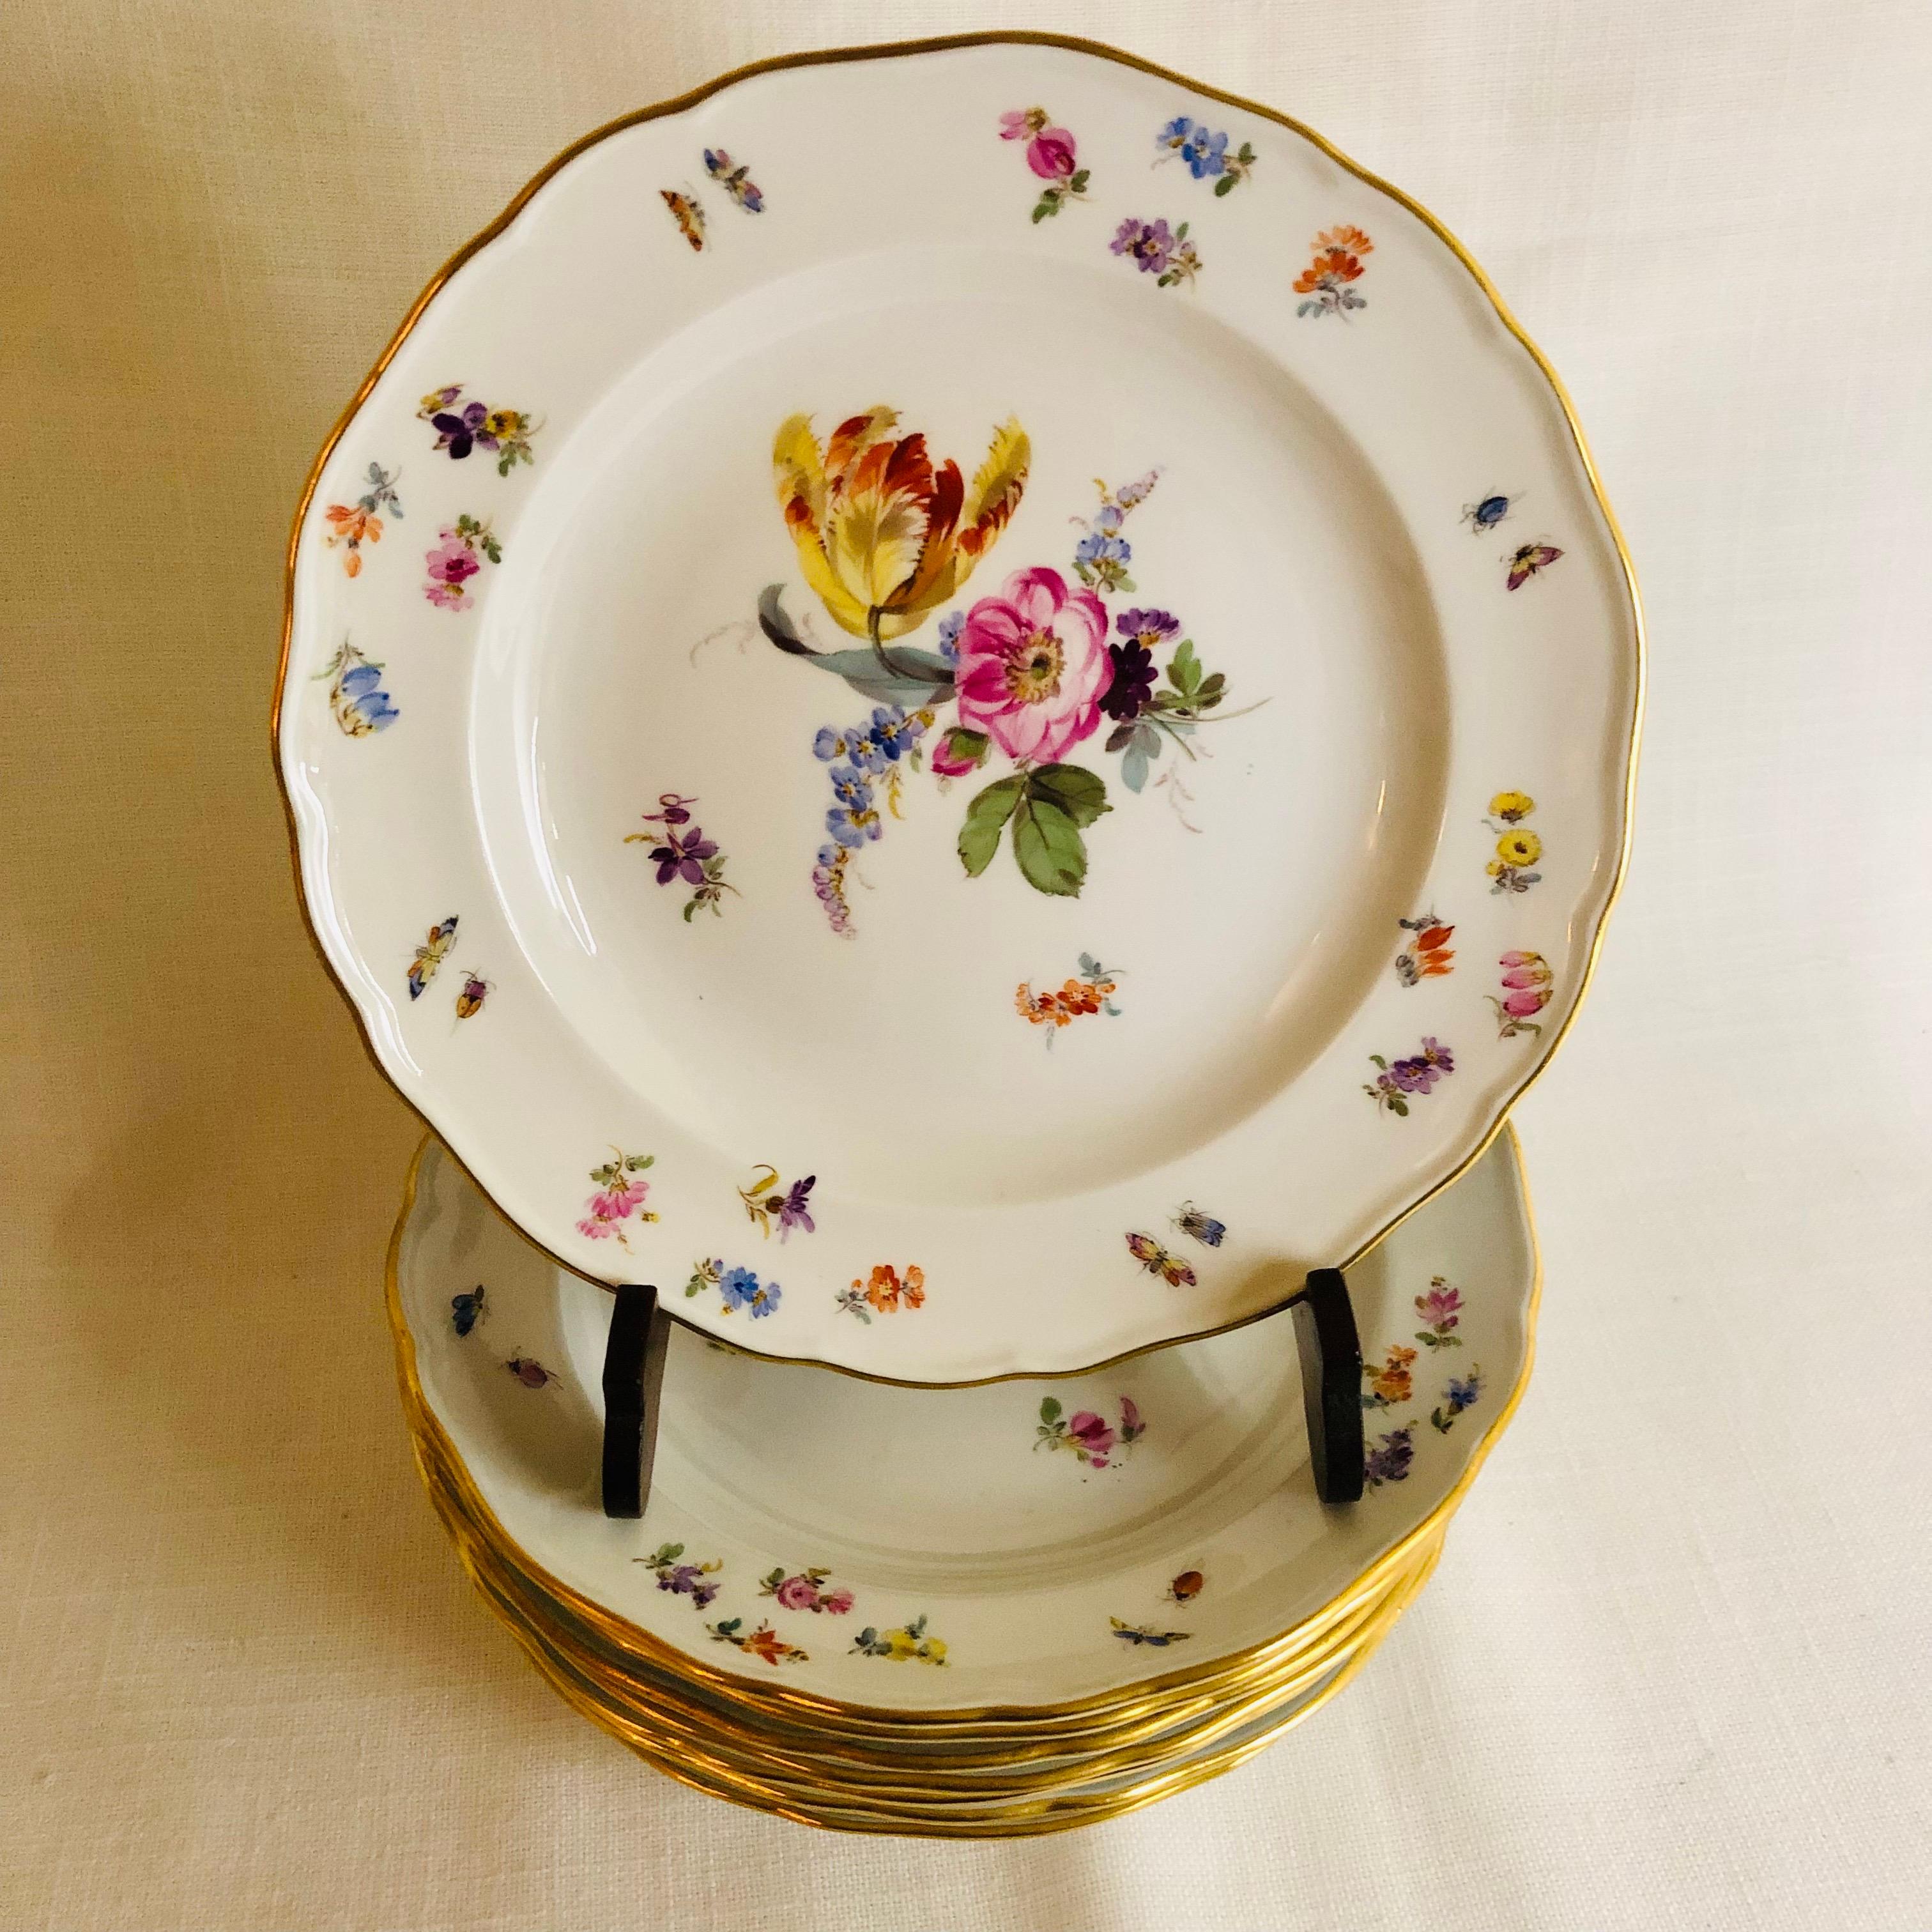 I want to offer you this beautiful set of eight Meissen dessert plates. Each plate is painted with a different central flower bouquet. Inside the gilded border of each plate are smaller flowers and insects as you can see on the attached photographs.